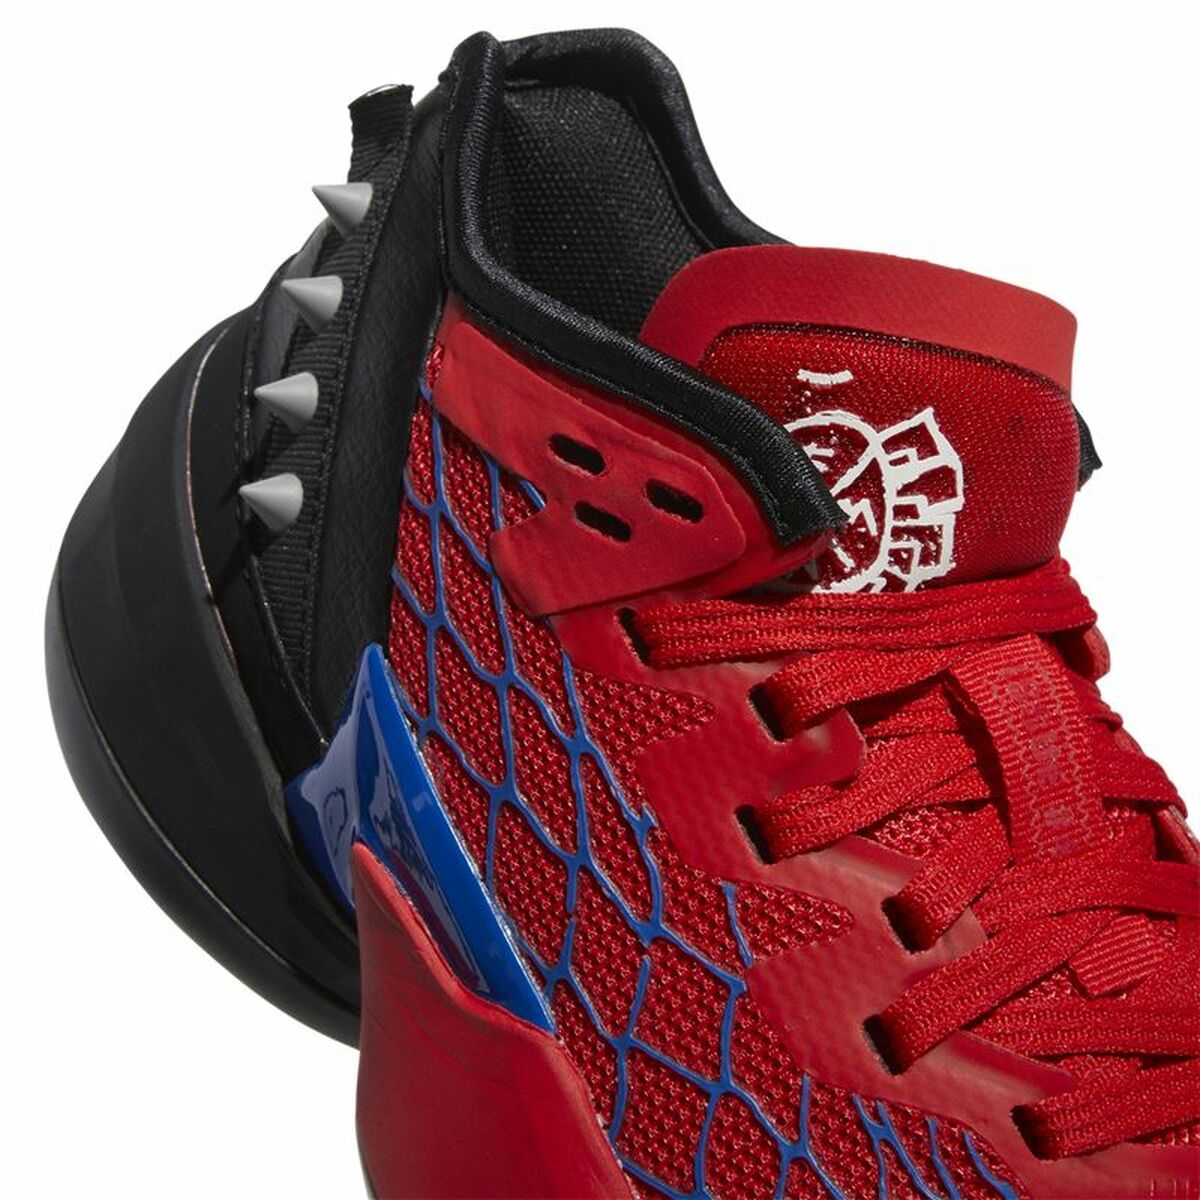 Basketball Shoes for Children Adidas D.O.N. Issue 4 Red